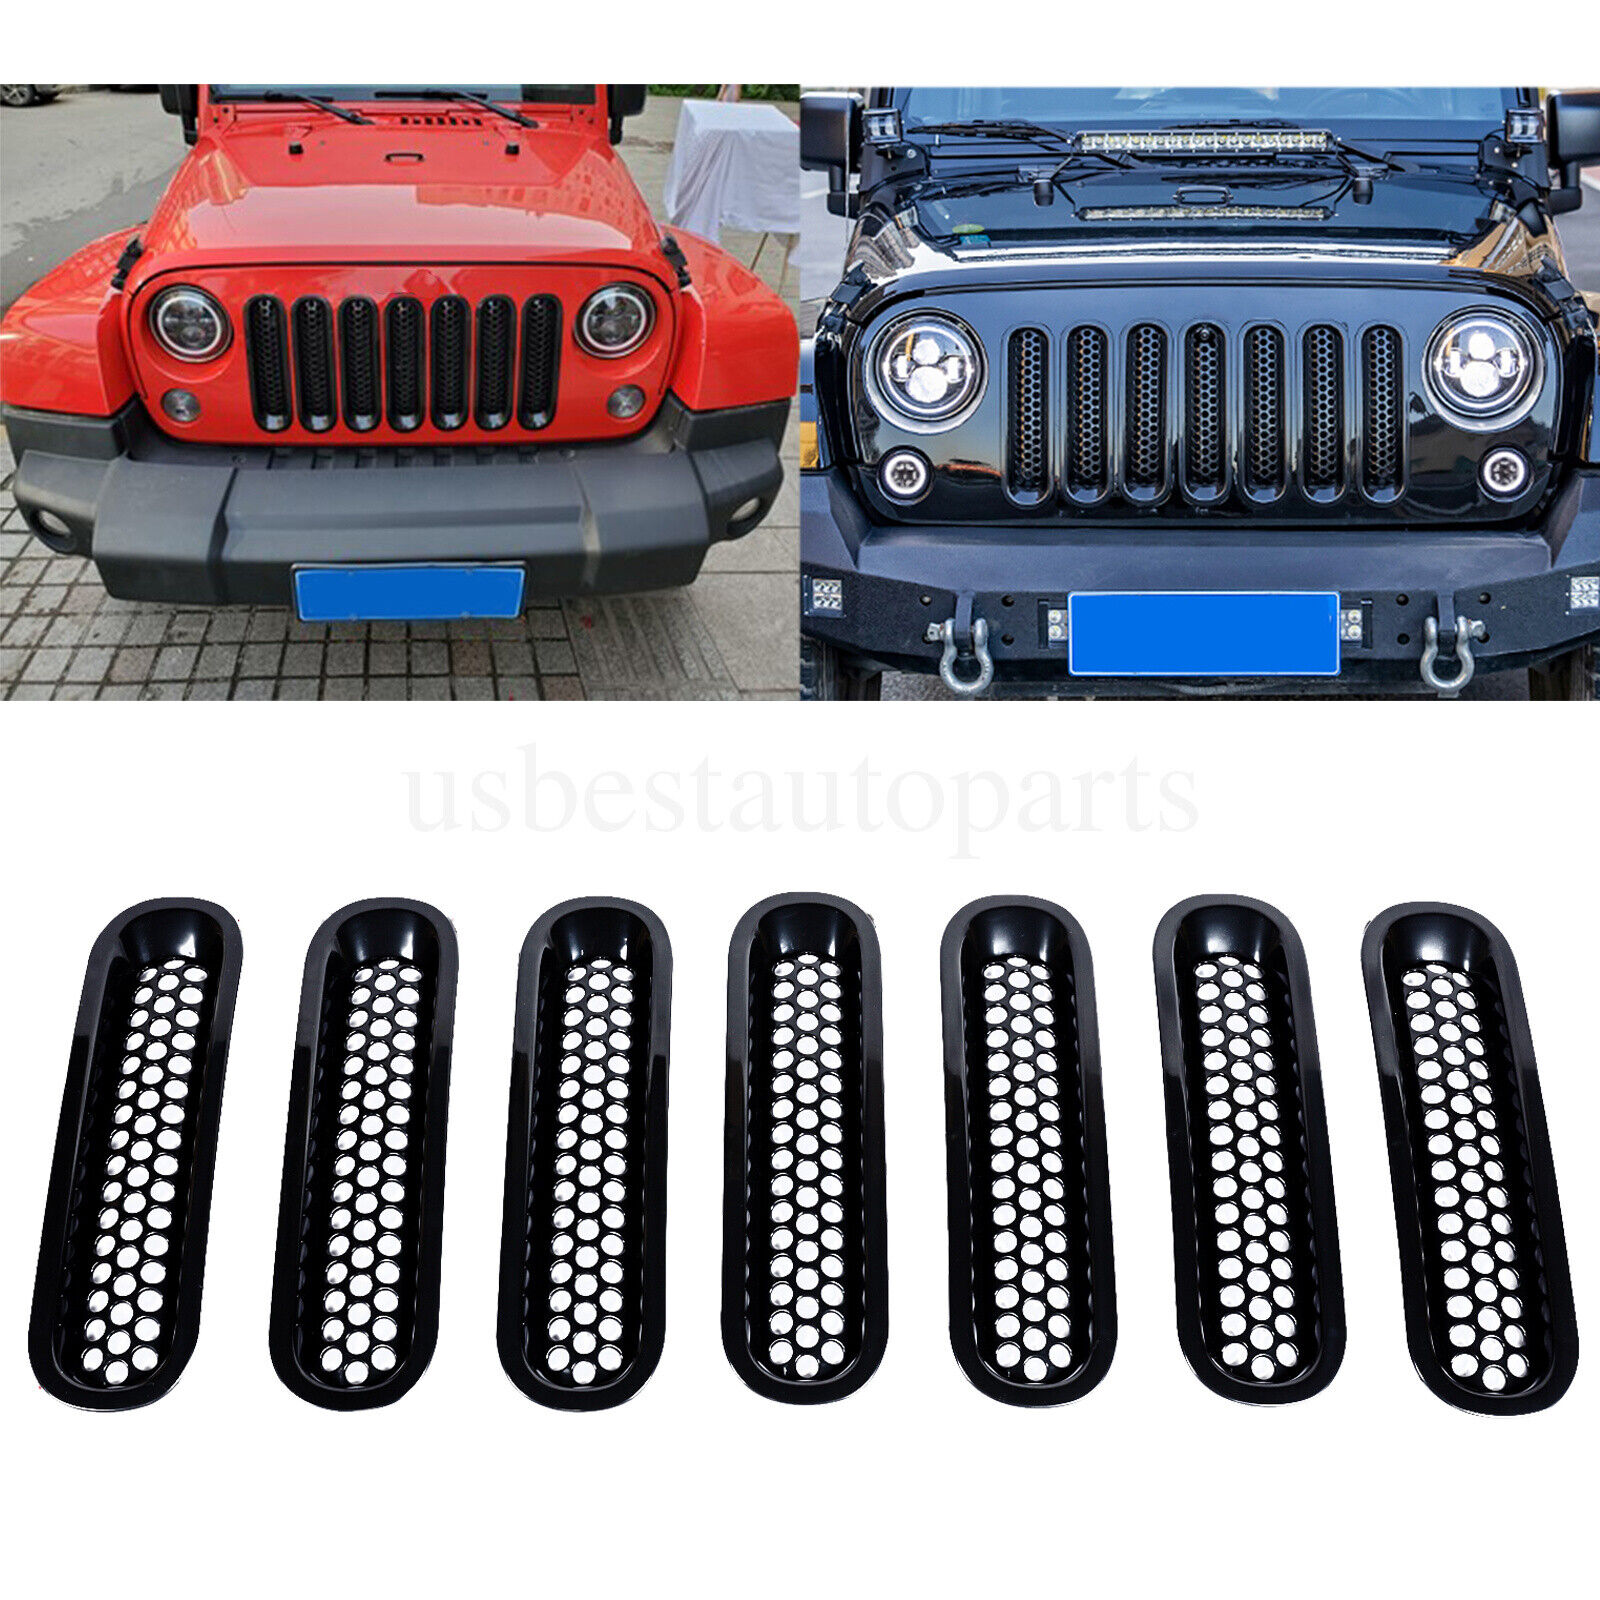 Fit For Jeep Wrangler JK 2007-18 Front Grill Insert Mesh Grille Trim Cover 7PCS